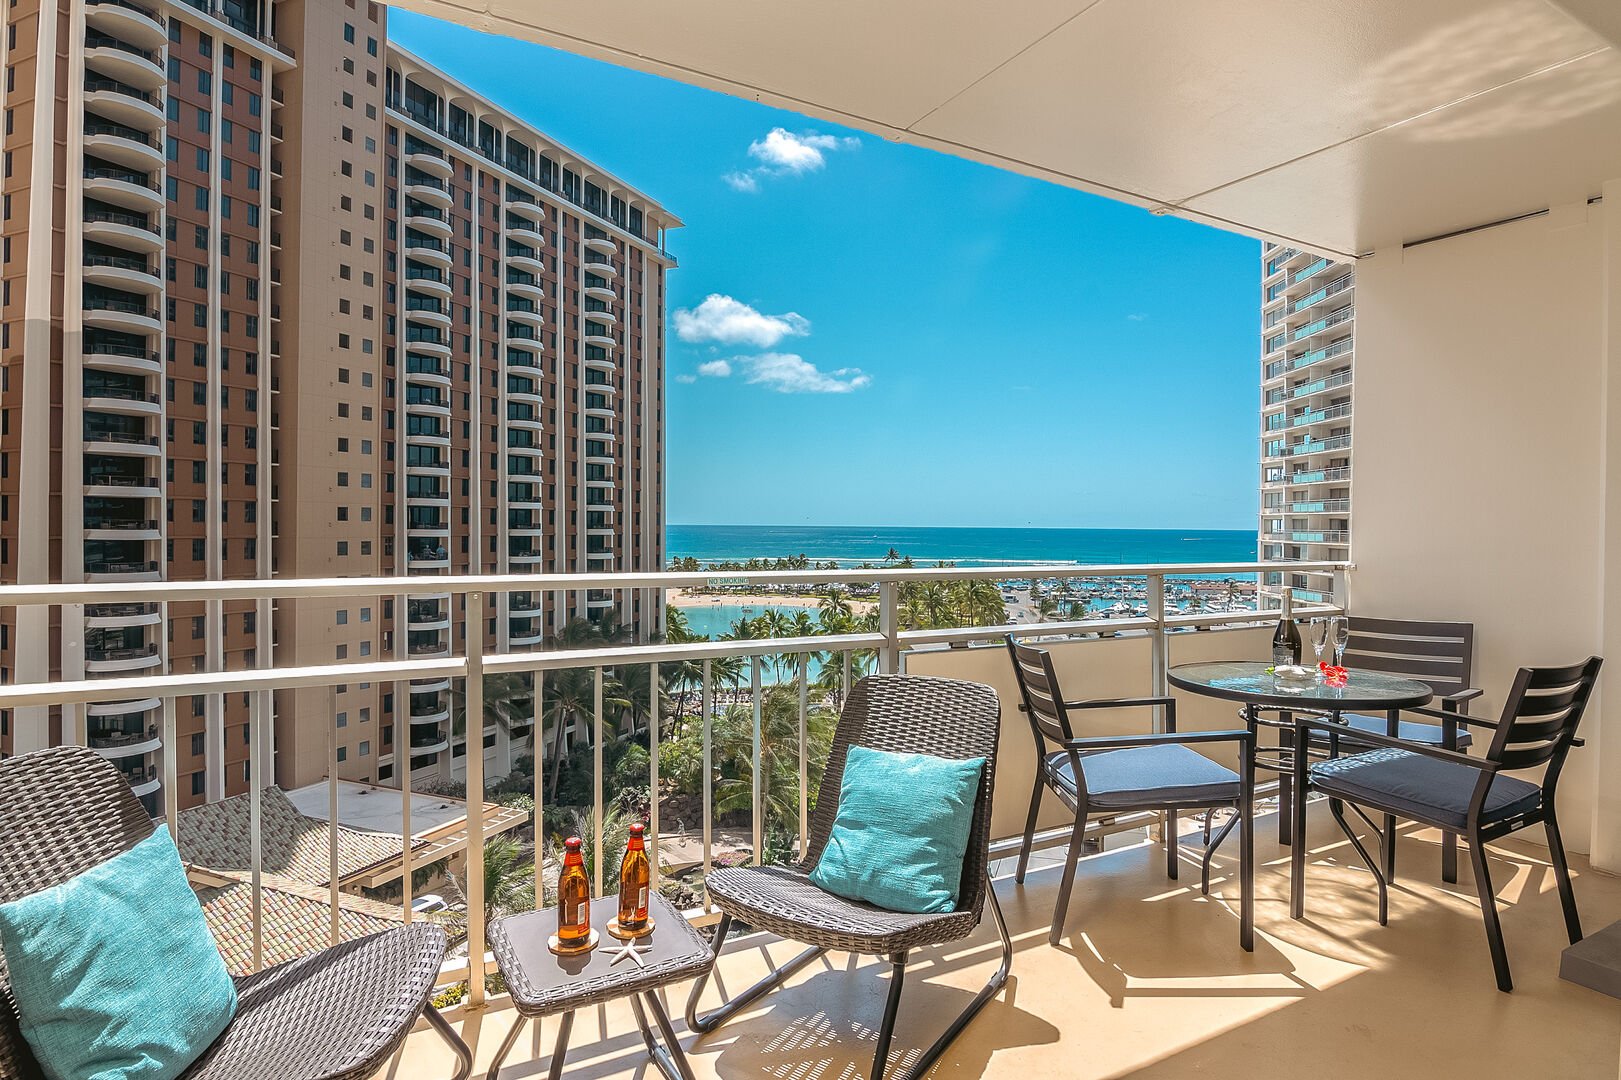 Enjoy a bottle of wine or beer on your balcony with patio sets with your family.